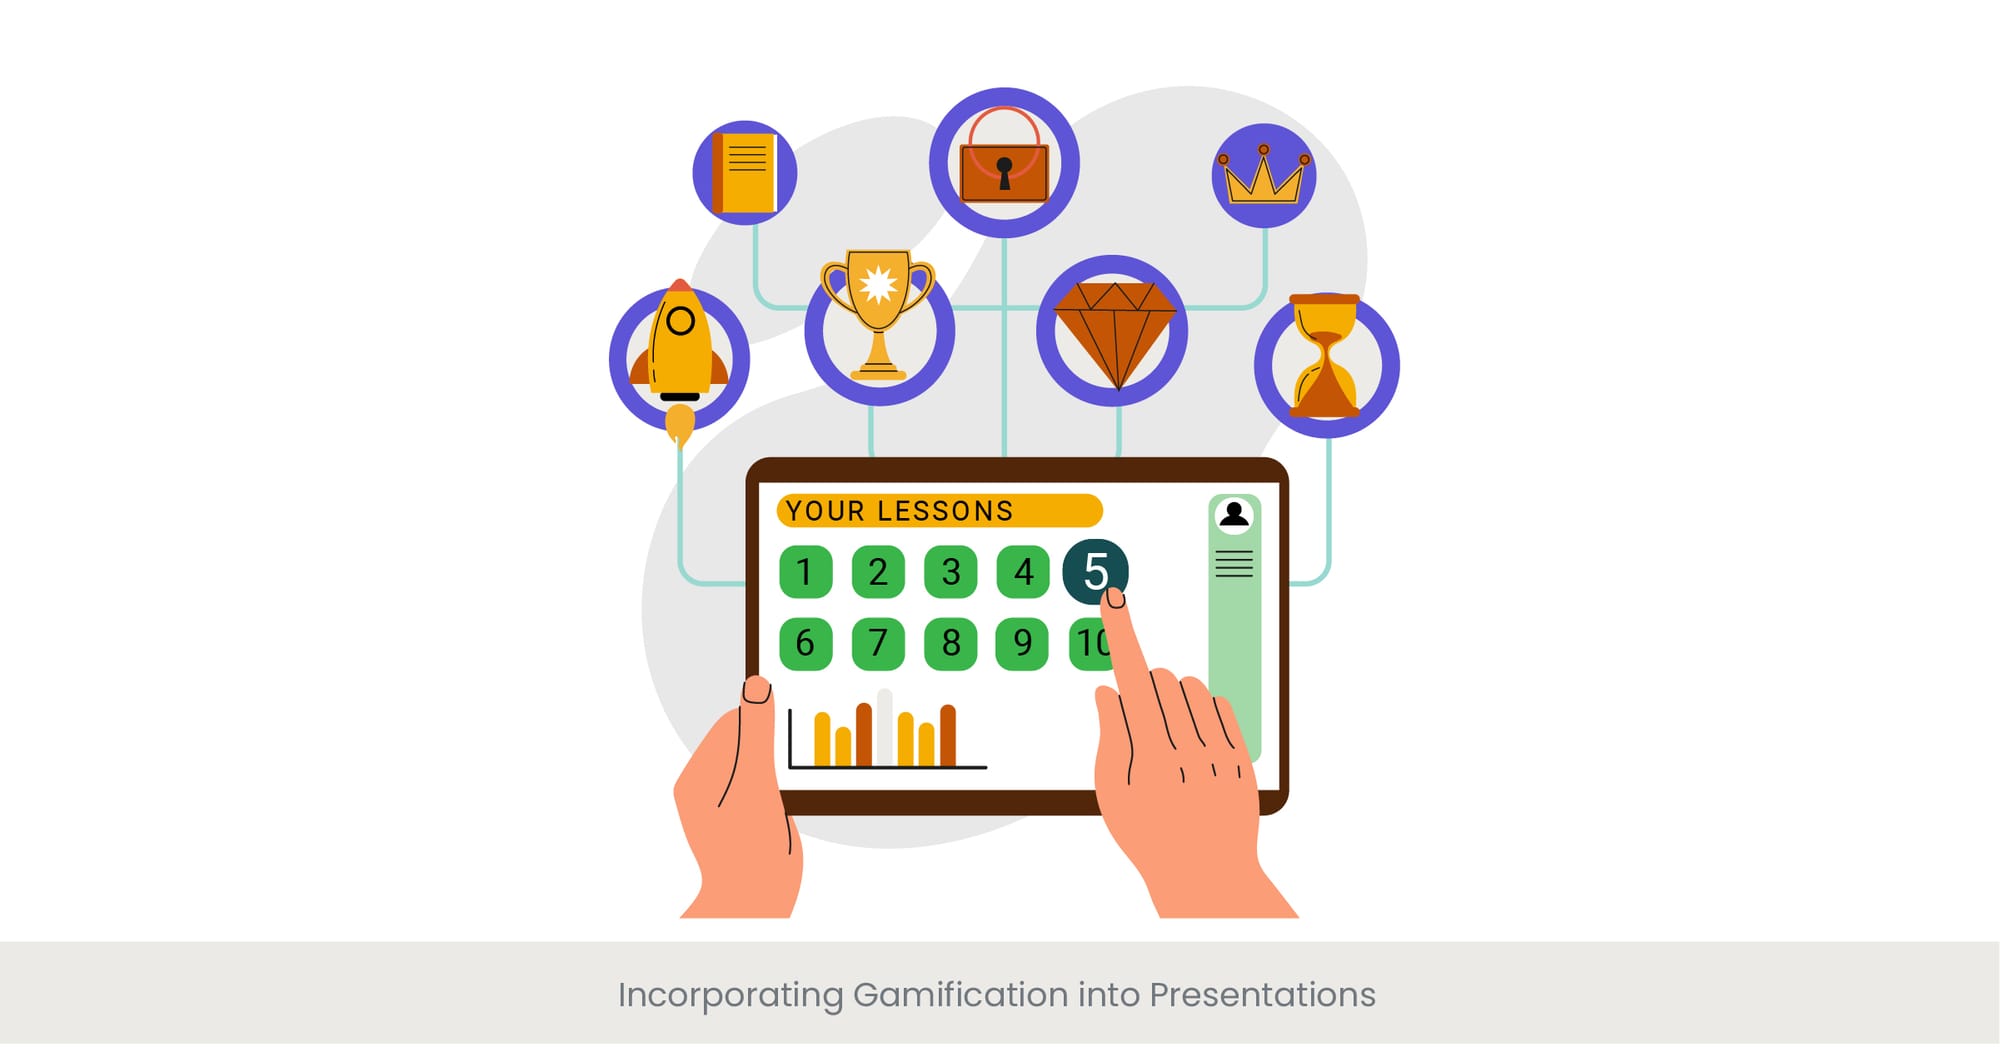 Incorporating Gamification into Presentations